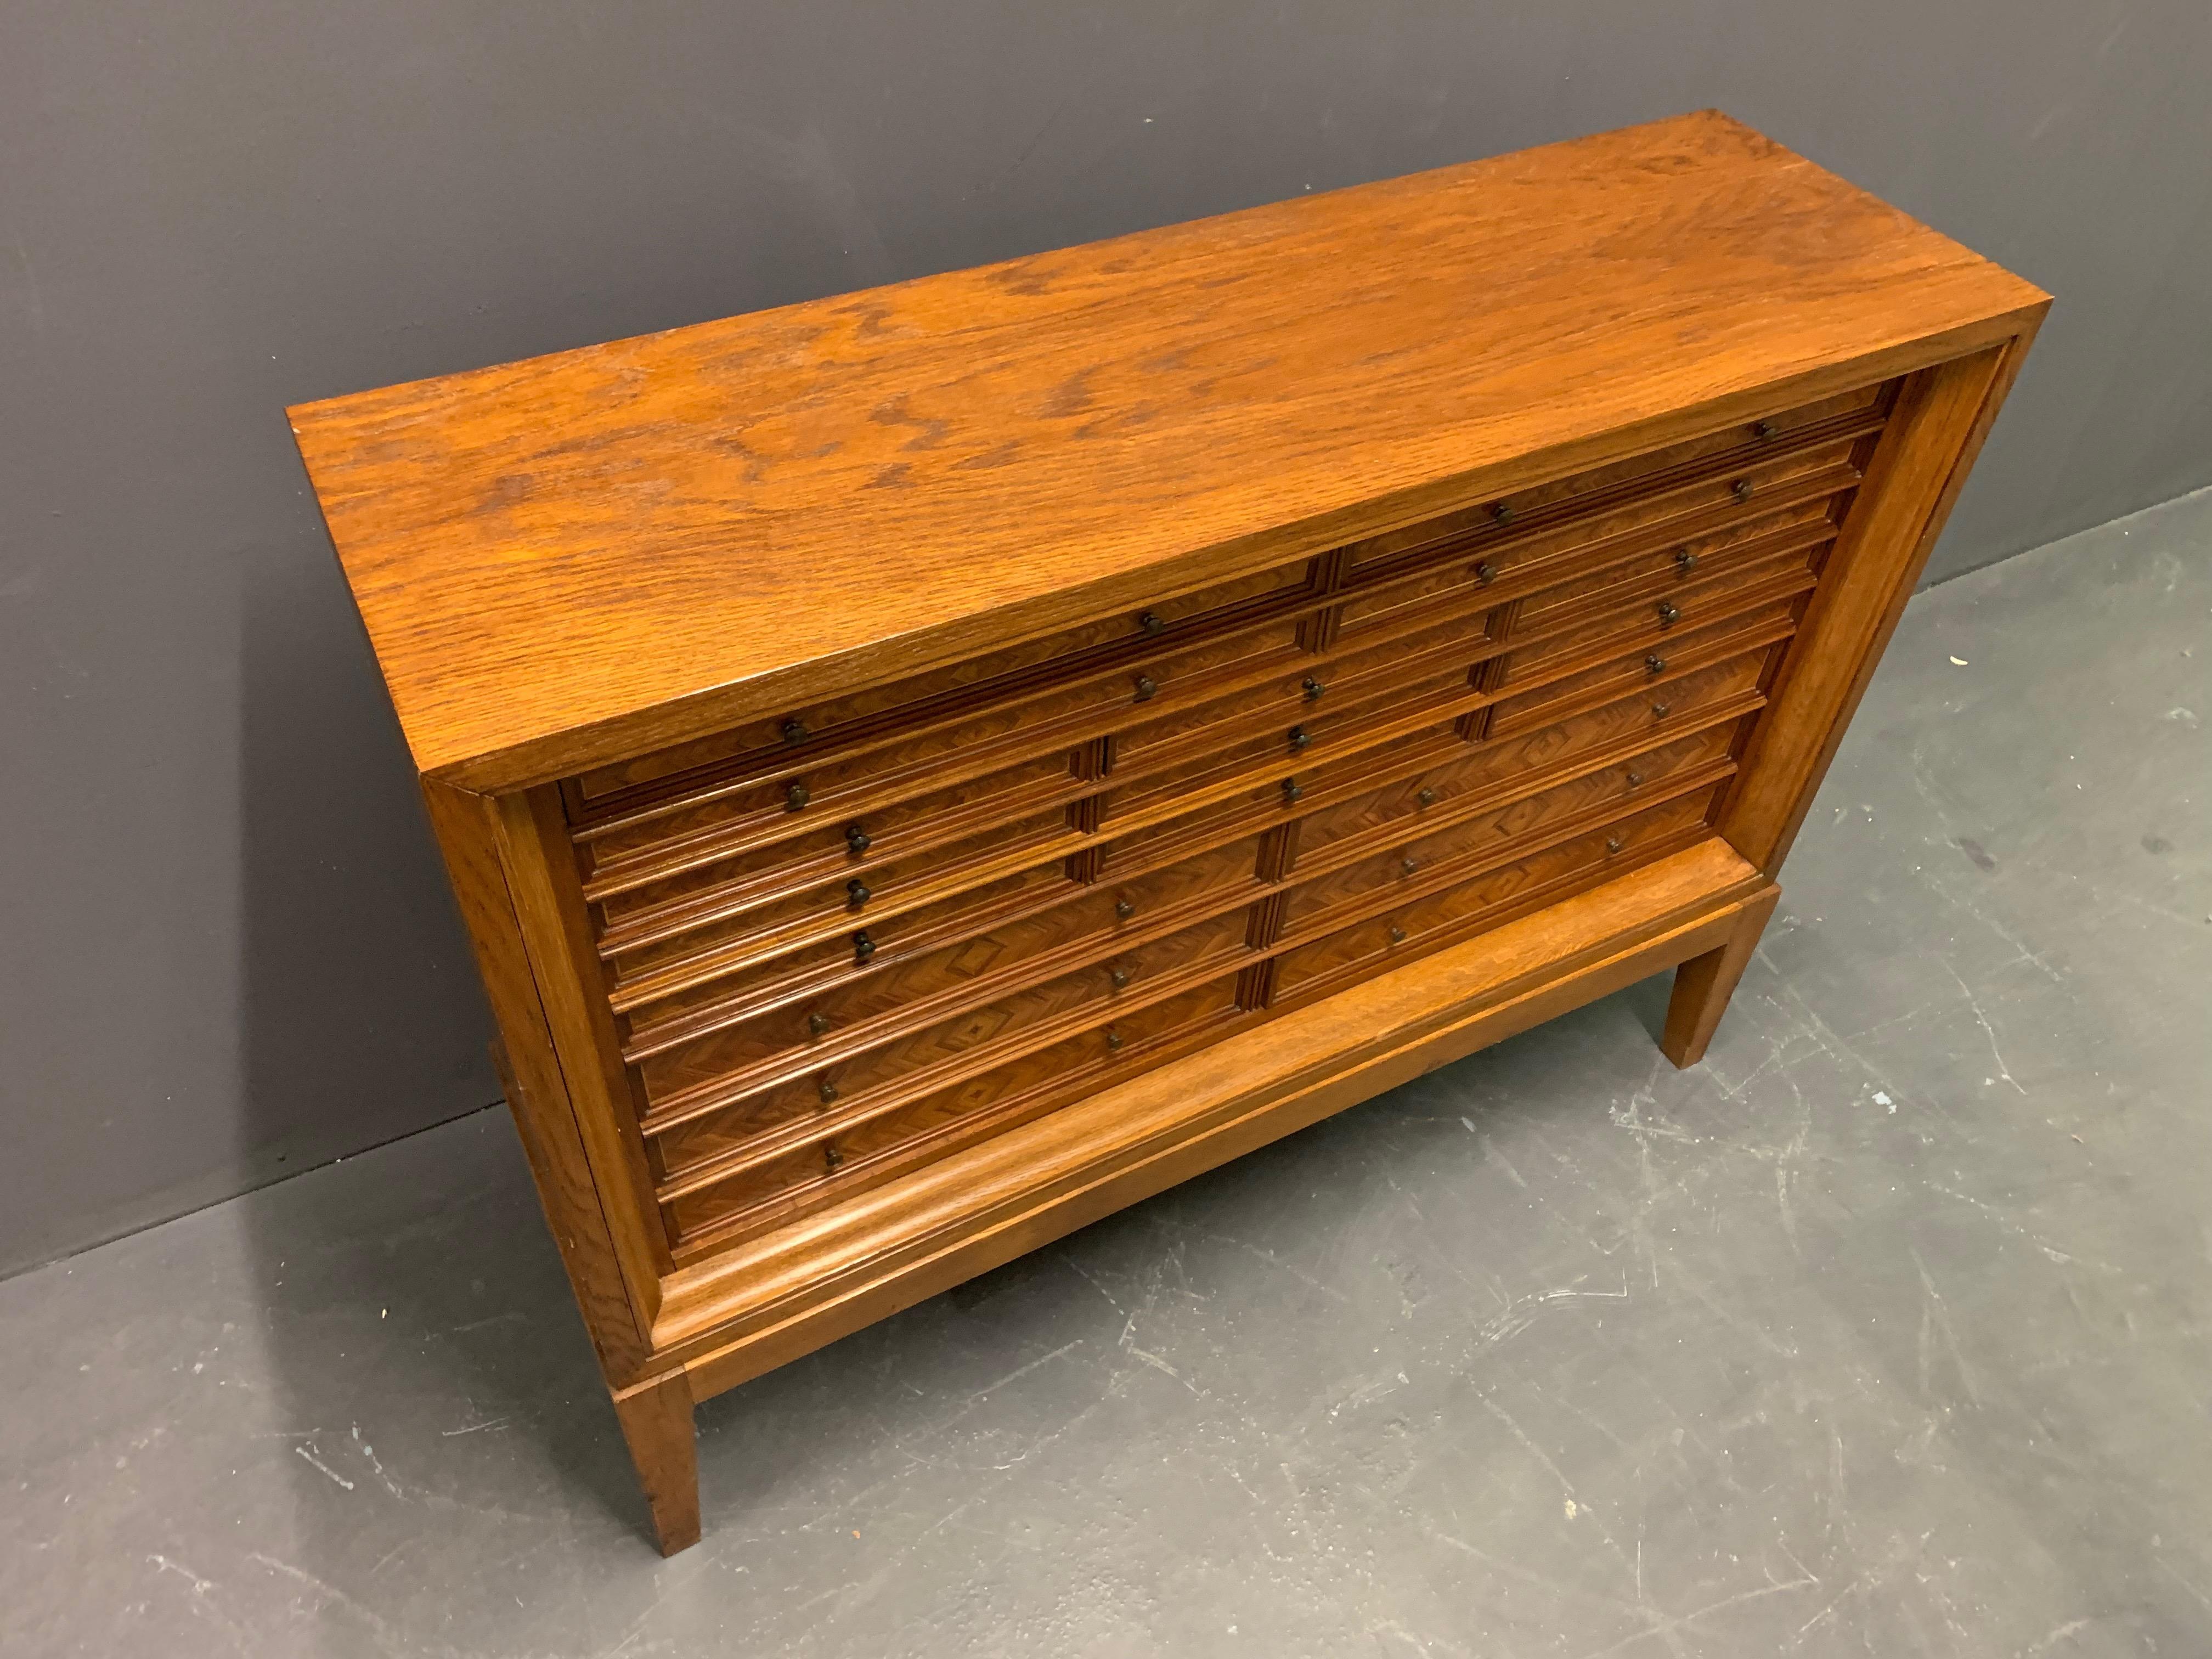 By unknown cabinetmaker. Oak and walnut veneer with various drawers. All lined with velvet.